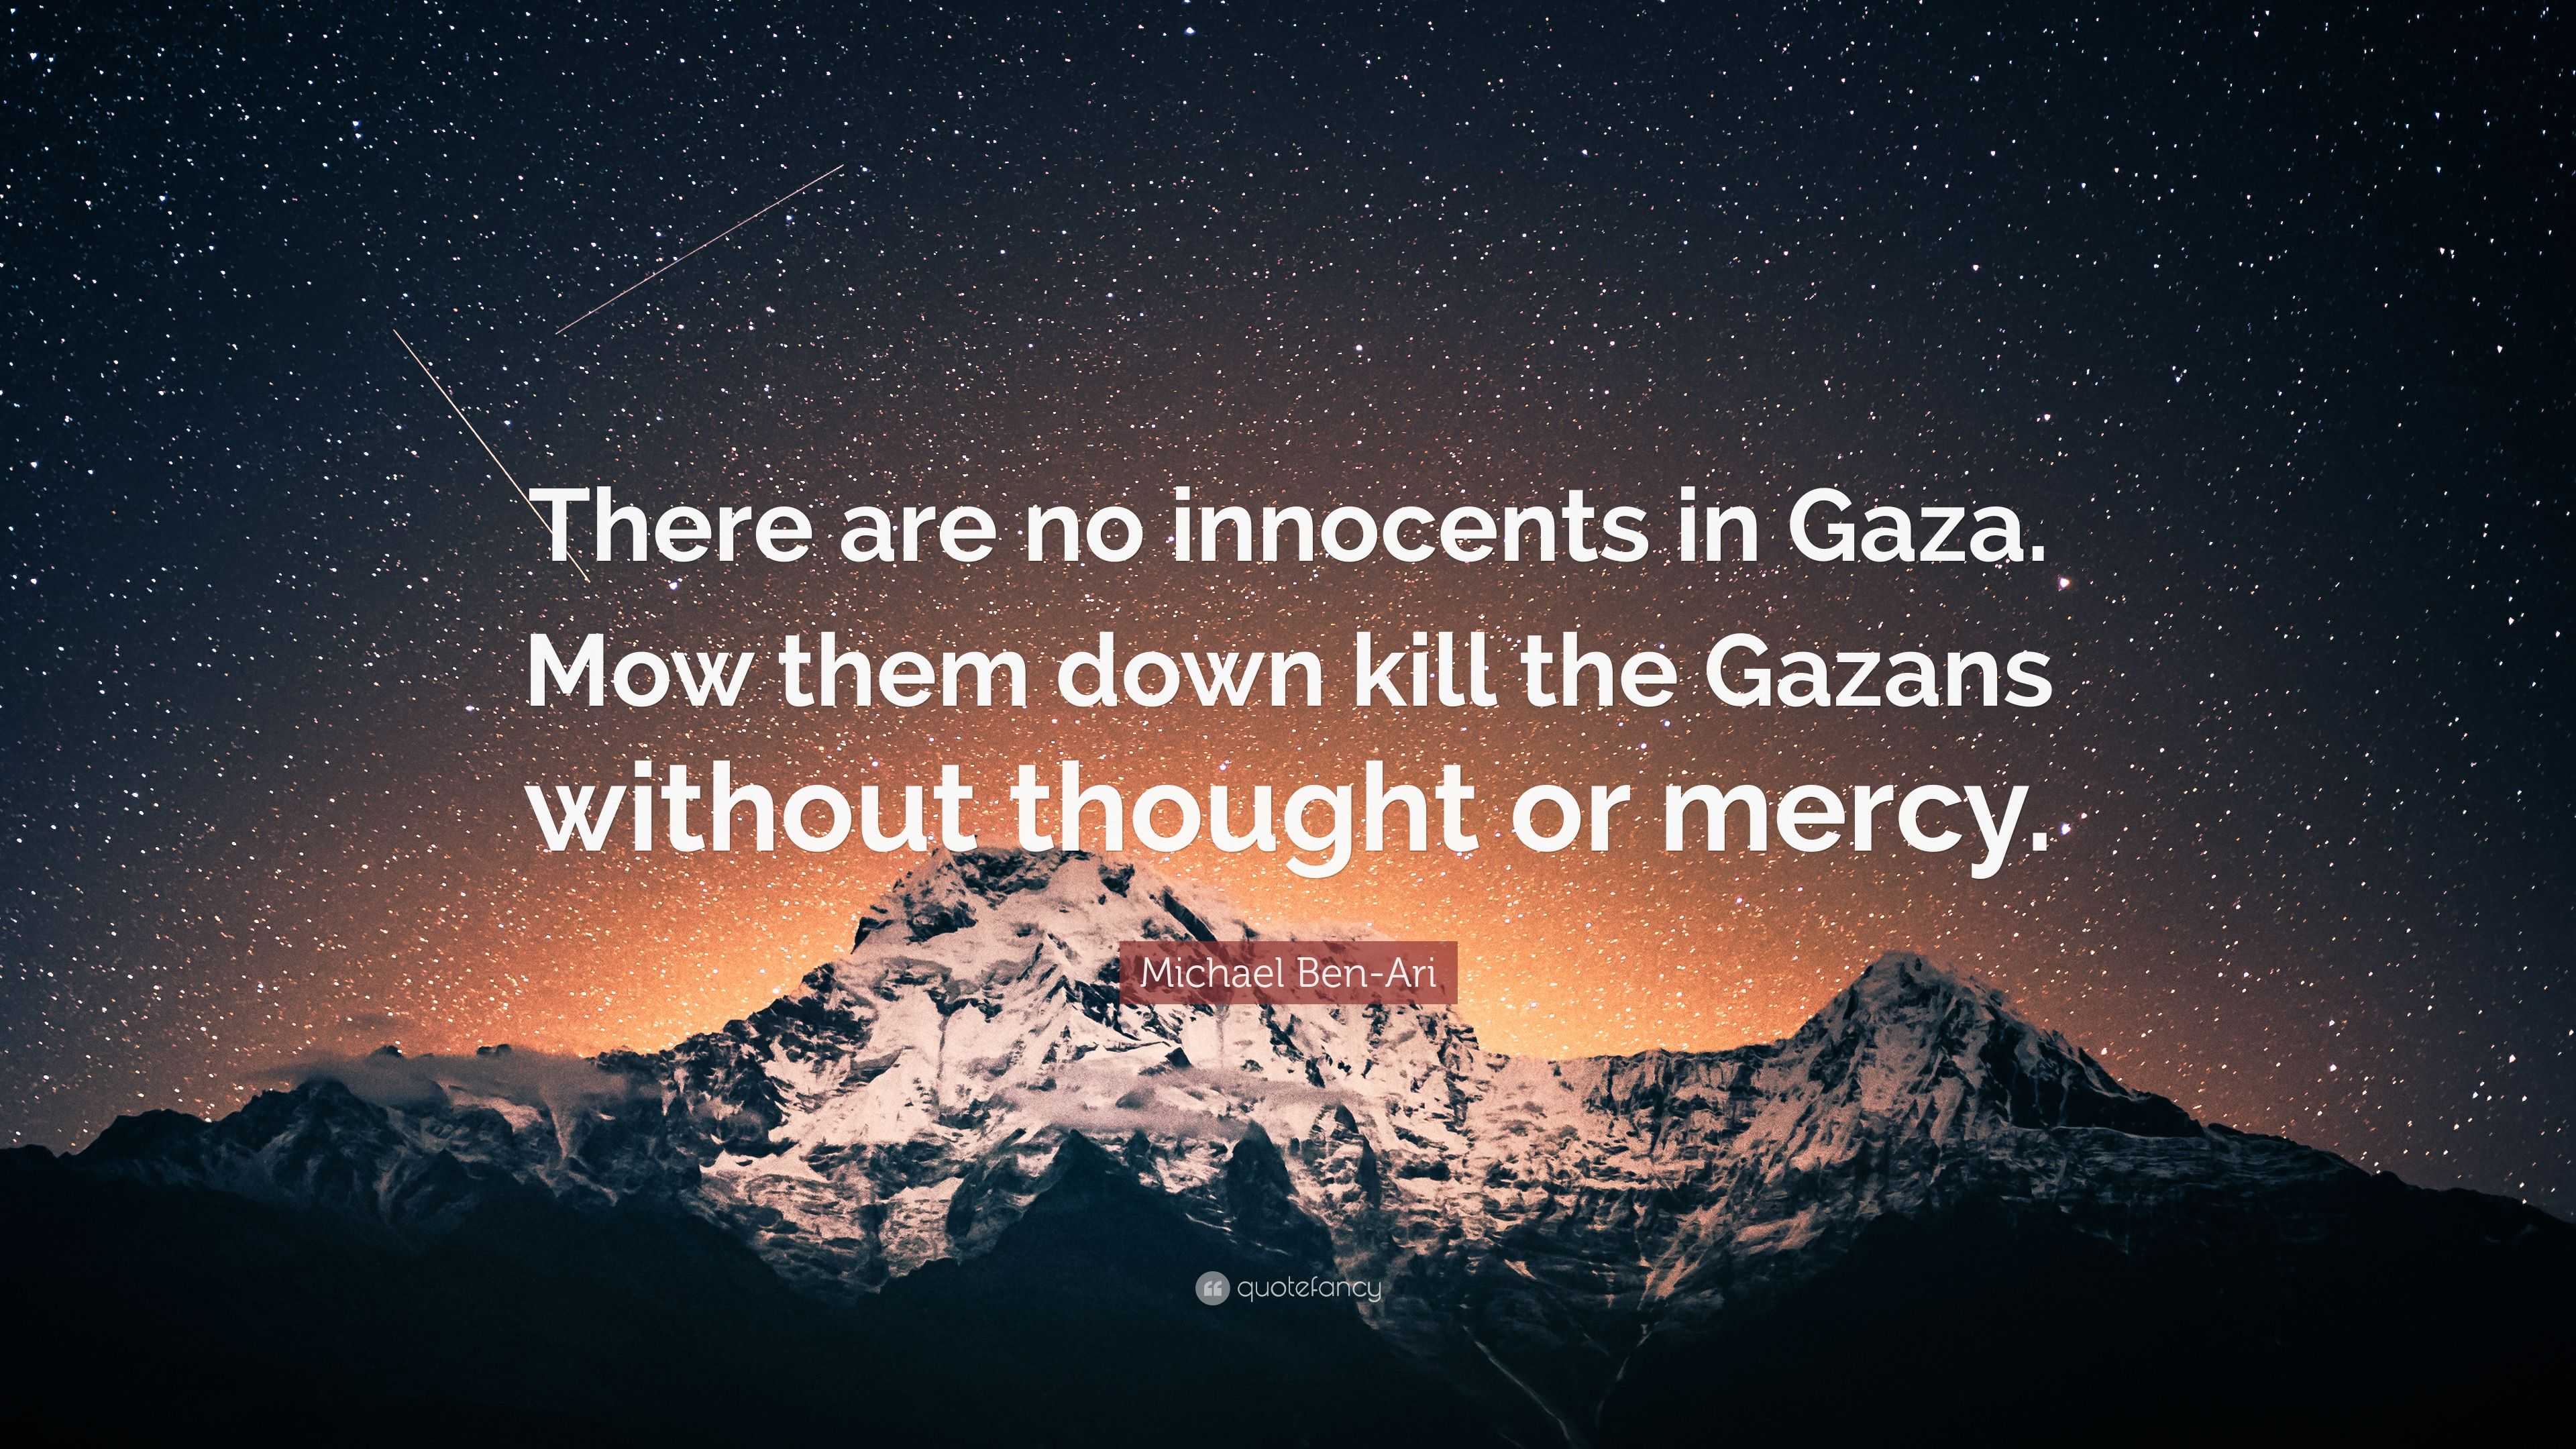 michael ben ari quote there are no innocents in gaza mow them down kill the gazans without thought or mercy 7 wallpapers quotefancy michael ben ari quote there are no